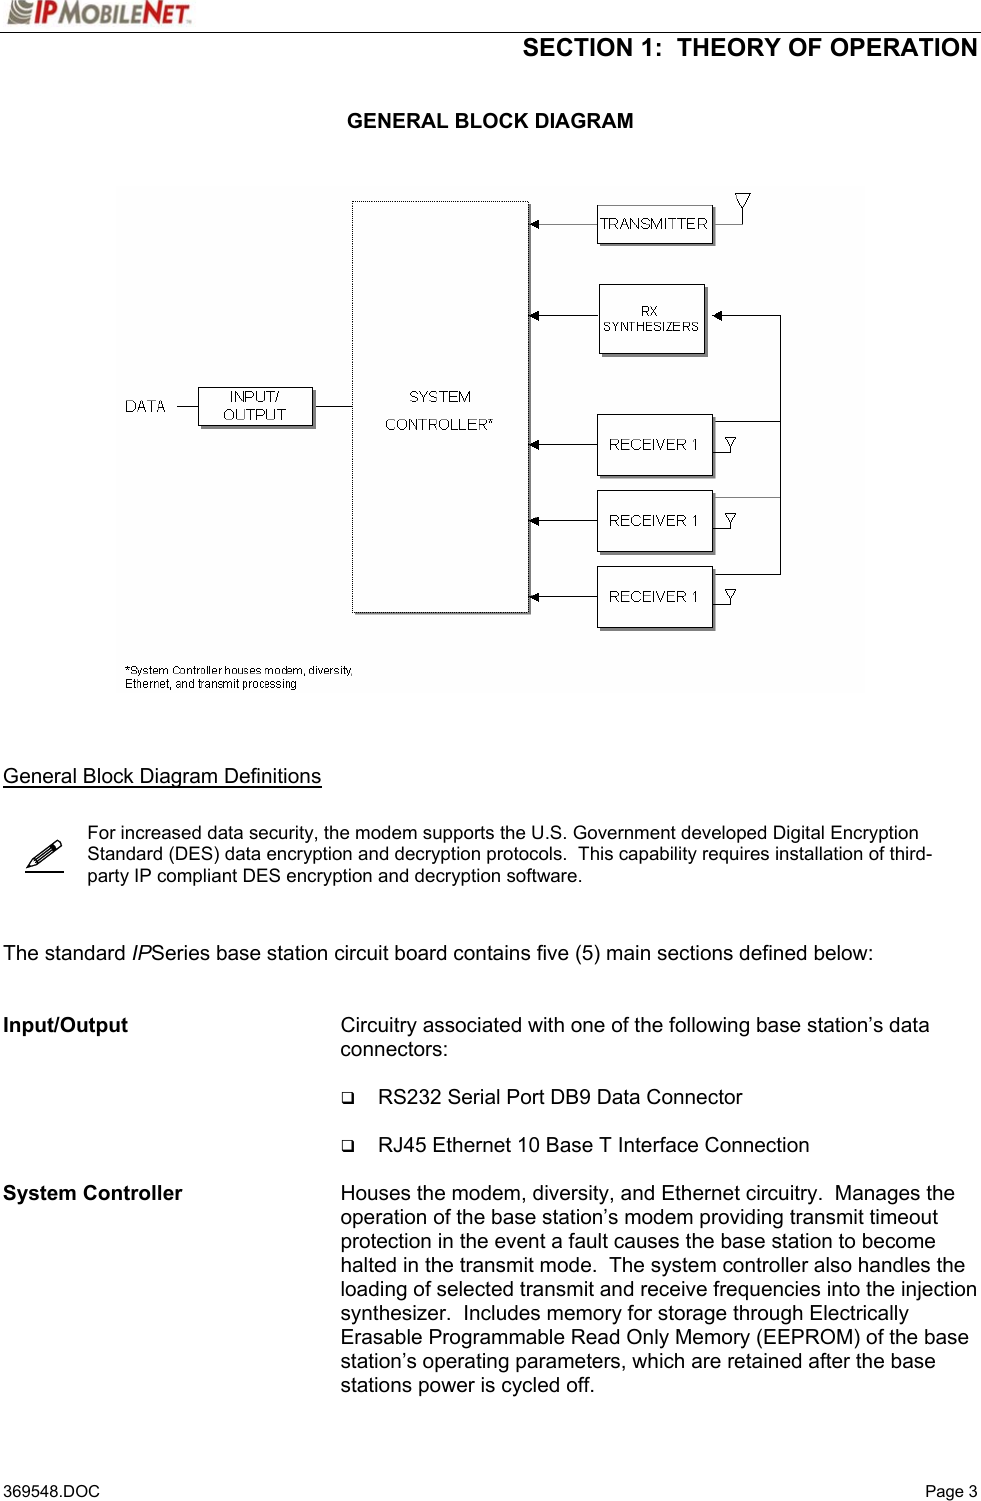  SECTION 1:  THEORY OF OPERATION   369548.DOC   Page 3   GENERAL BLOCK DIAGRAM       General Block Diagram Definitions     For increased data security, the modem supports the U.S. Government developed Digital Encryption Standard (DES) data encryption and decryption protocols.  This capability requires installation of third-party IP compliant DES encryption and decryption software.    The standard IPSeries base station circuit board contains five (5) main sections defined below:   Input/Output    Circuitry associated with one of the following base station’s data connectors:   RS232 Serial Port DB9 Data Connector   RJ45 Ethernet 10 Base T Interface Connection  System Controller    Houses the modem, diversity, and Ethernet circuitry.  Manages the operation of the base station’s modem providing transmit timeout protection in the event a fault causes the base station to become halted in the transmit mode.  The system controller also handles the loading of selected transmit and receive frequencies into the injection synthesizer.  Includes memory for storage through Electrically Erasable Programmable Read Only Memory (EEPROM) of the base station’s operating parameters, which are retained after the base stations power is cycled off.   